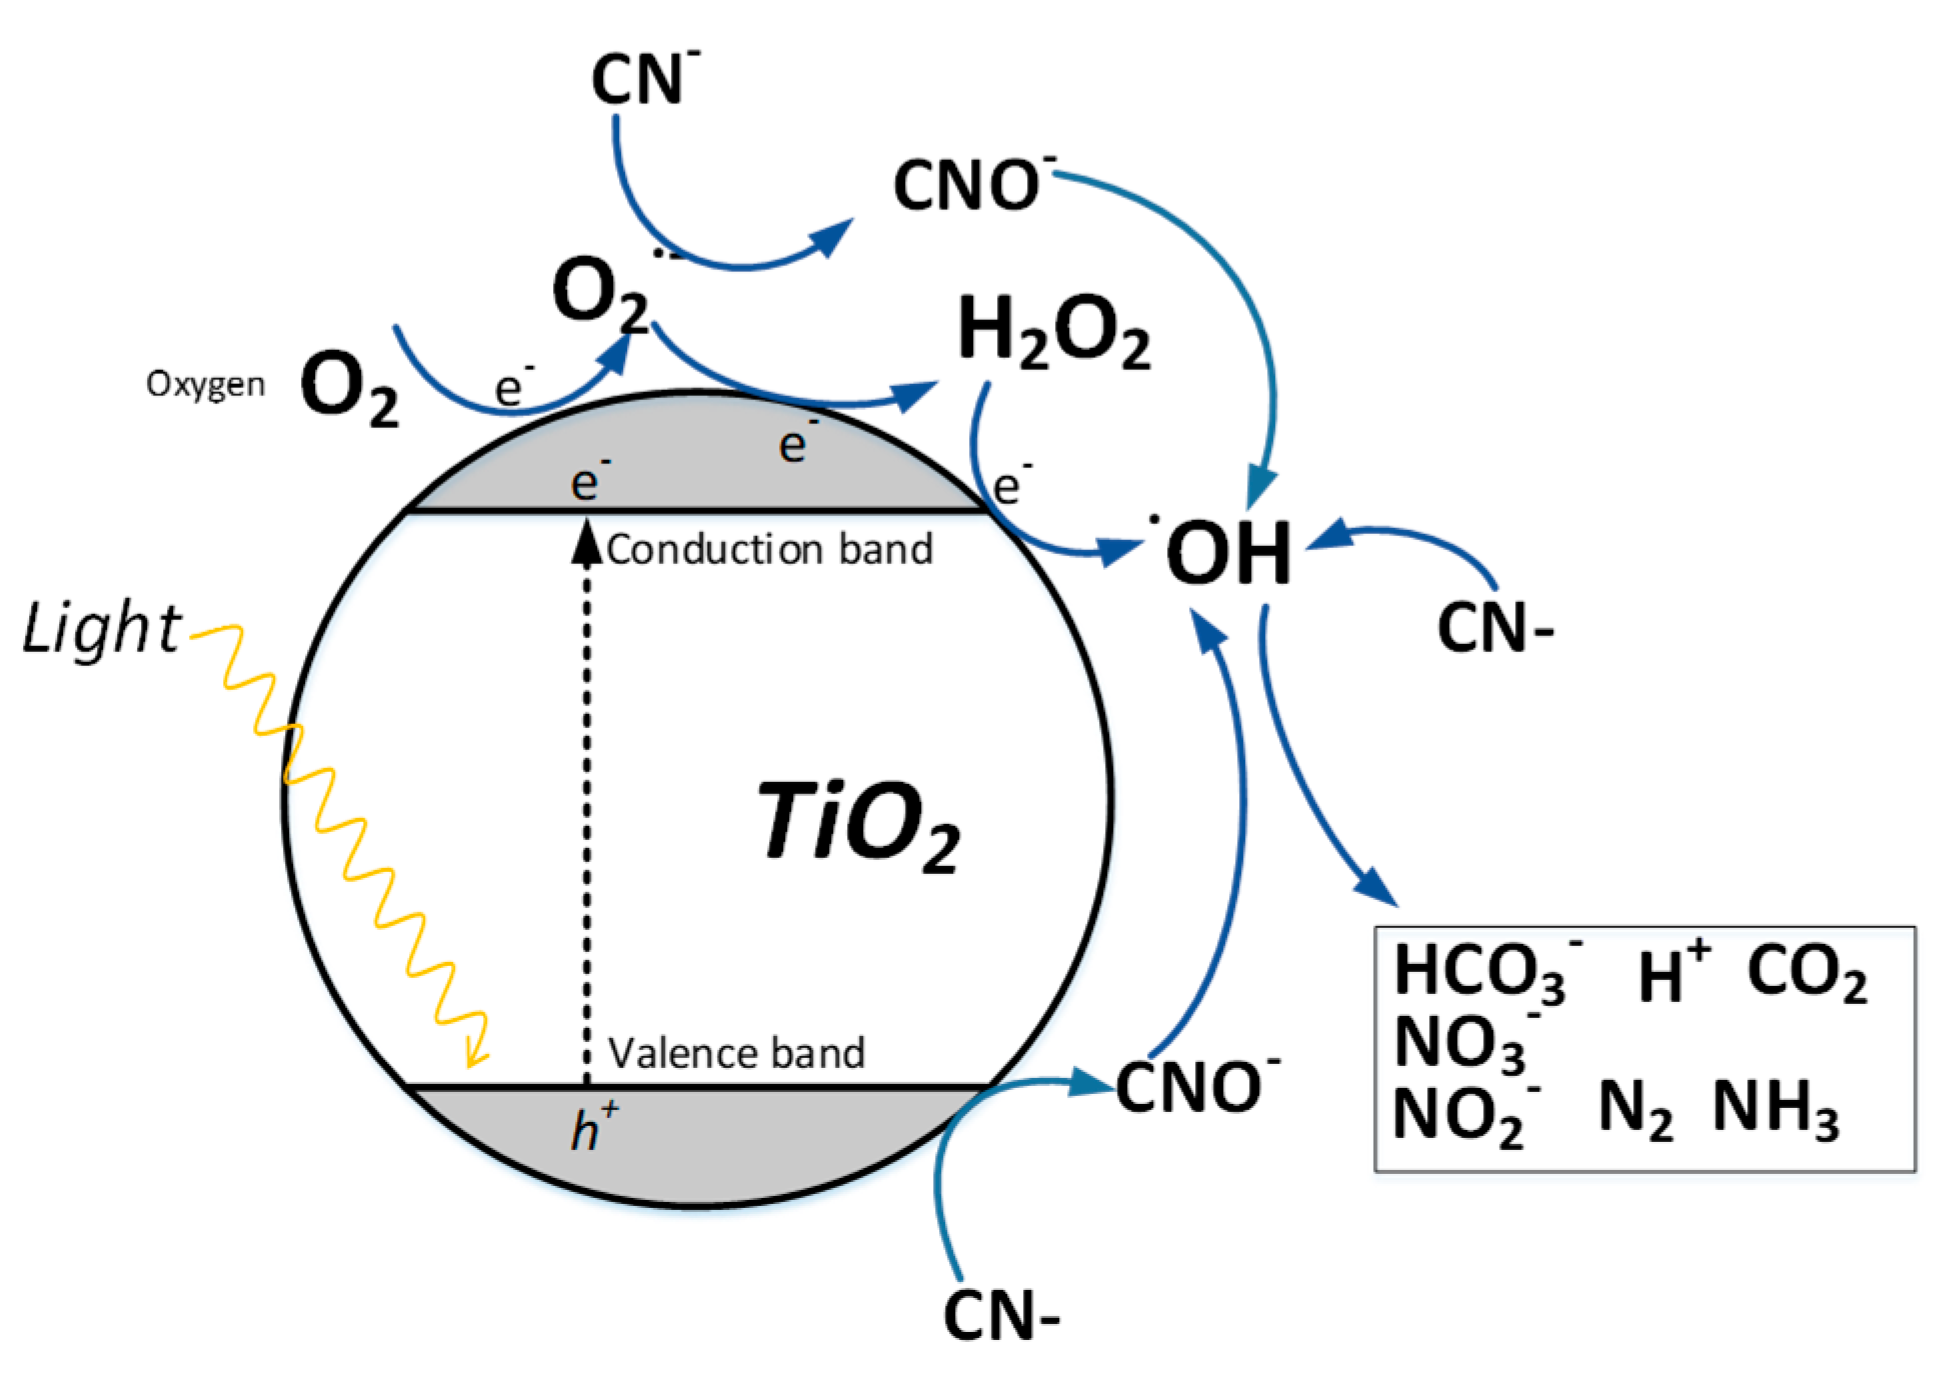 Processes | Free Full-Text | Recent Developments in the Photocatalytic  Treatment of Cyanide Wastewater: An Approach to Remediation and Recovery of  Metals | HTML